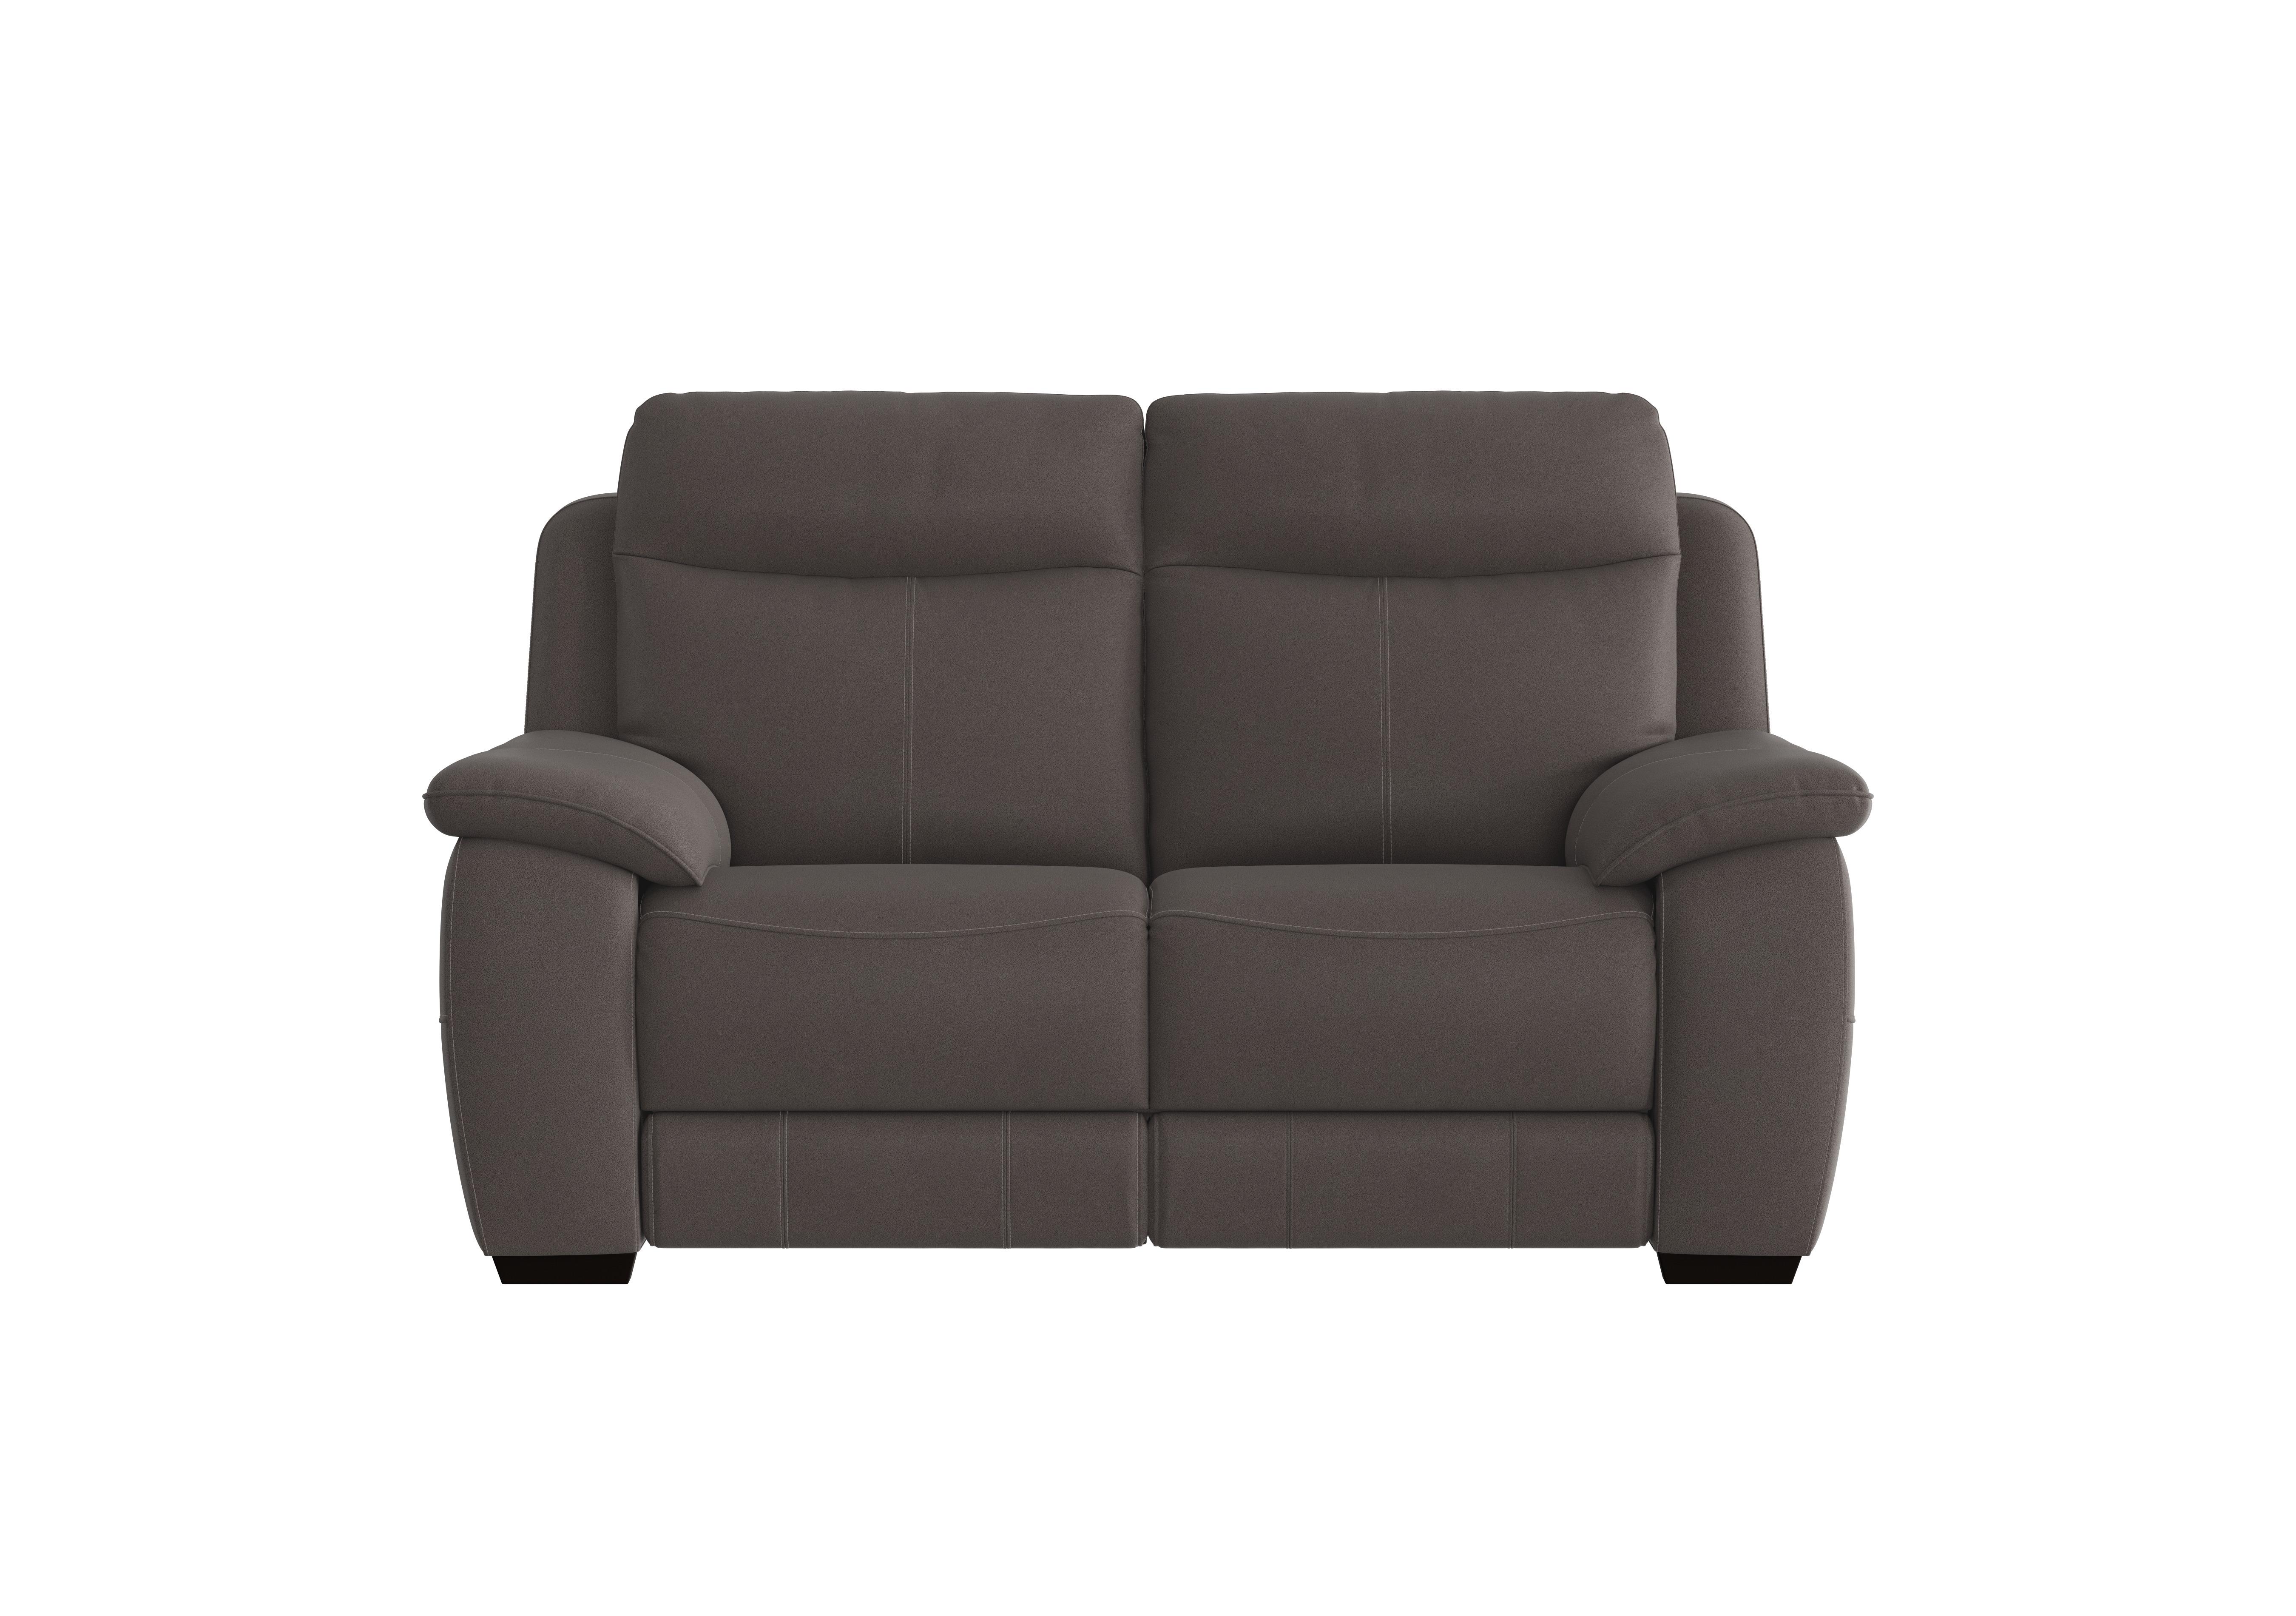 Starlight Express 2 Seater Fabric Recliner Sofa with Power Headrests in Bfa-Blj-R16 Grey on Furniture Village